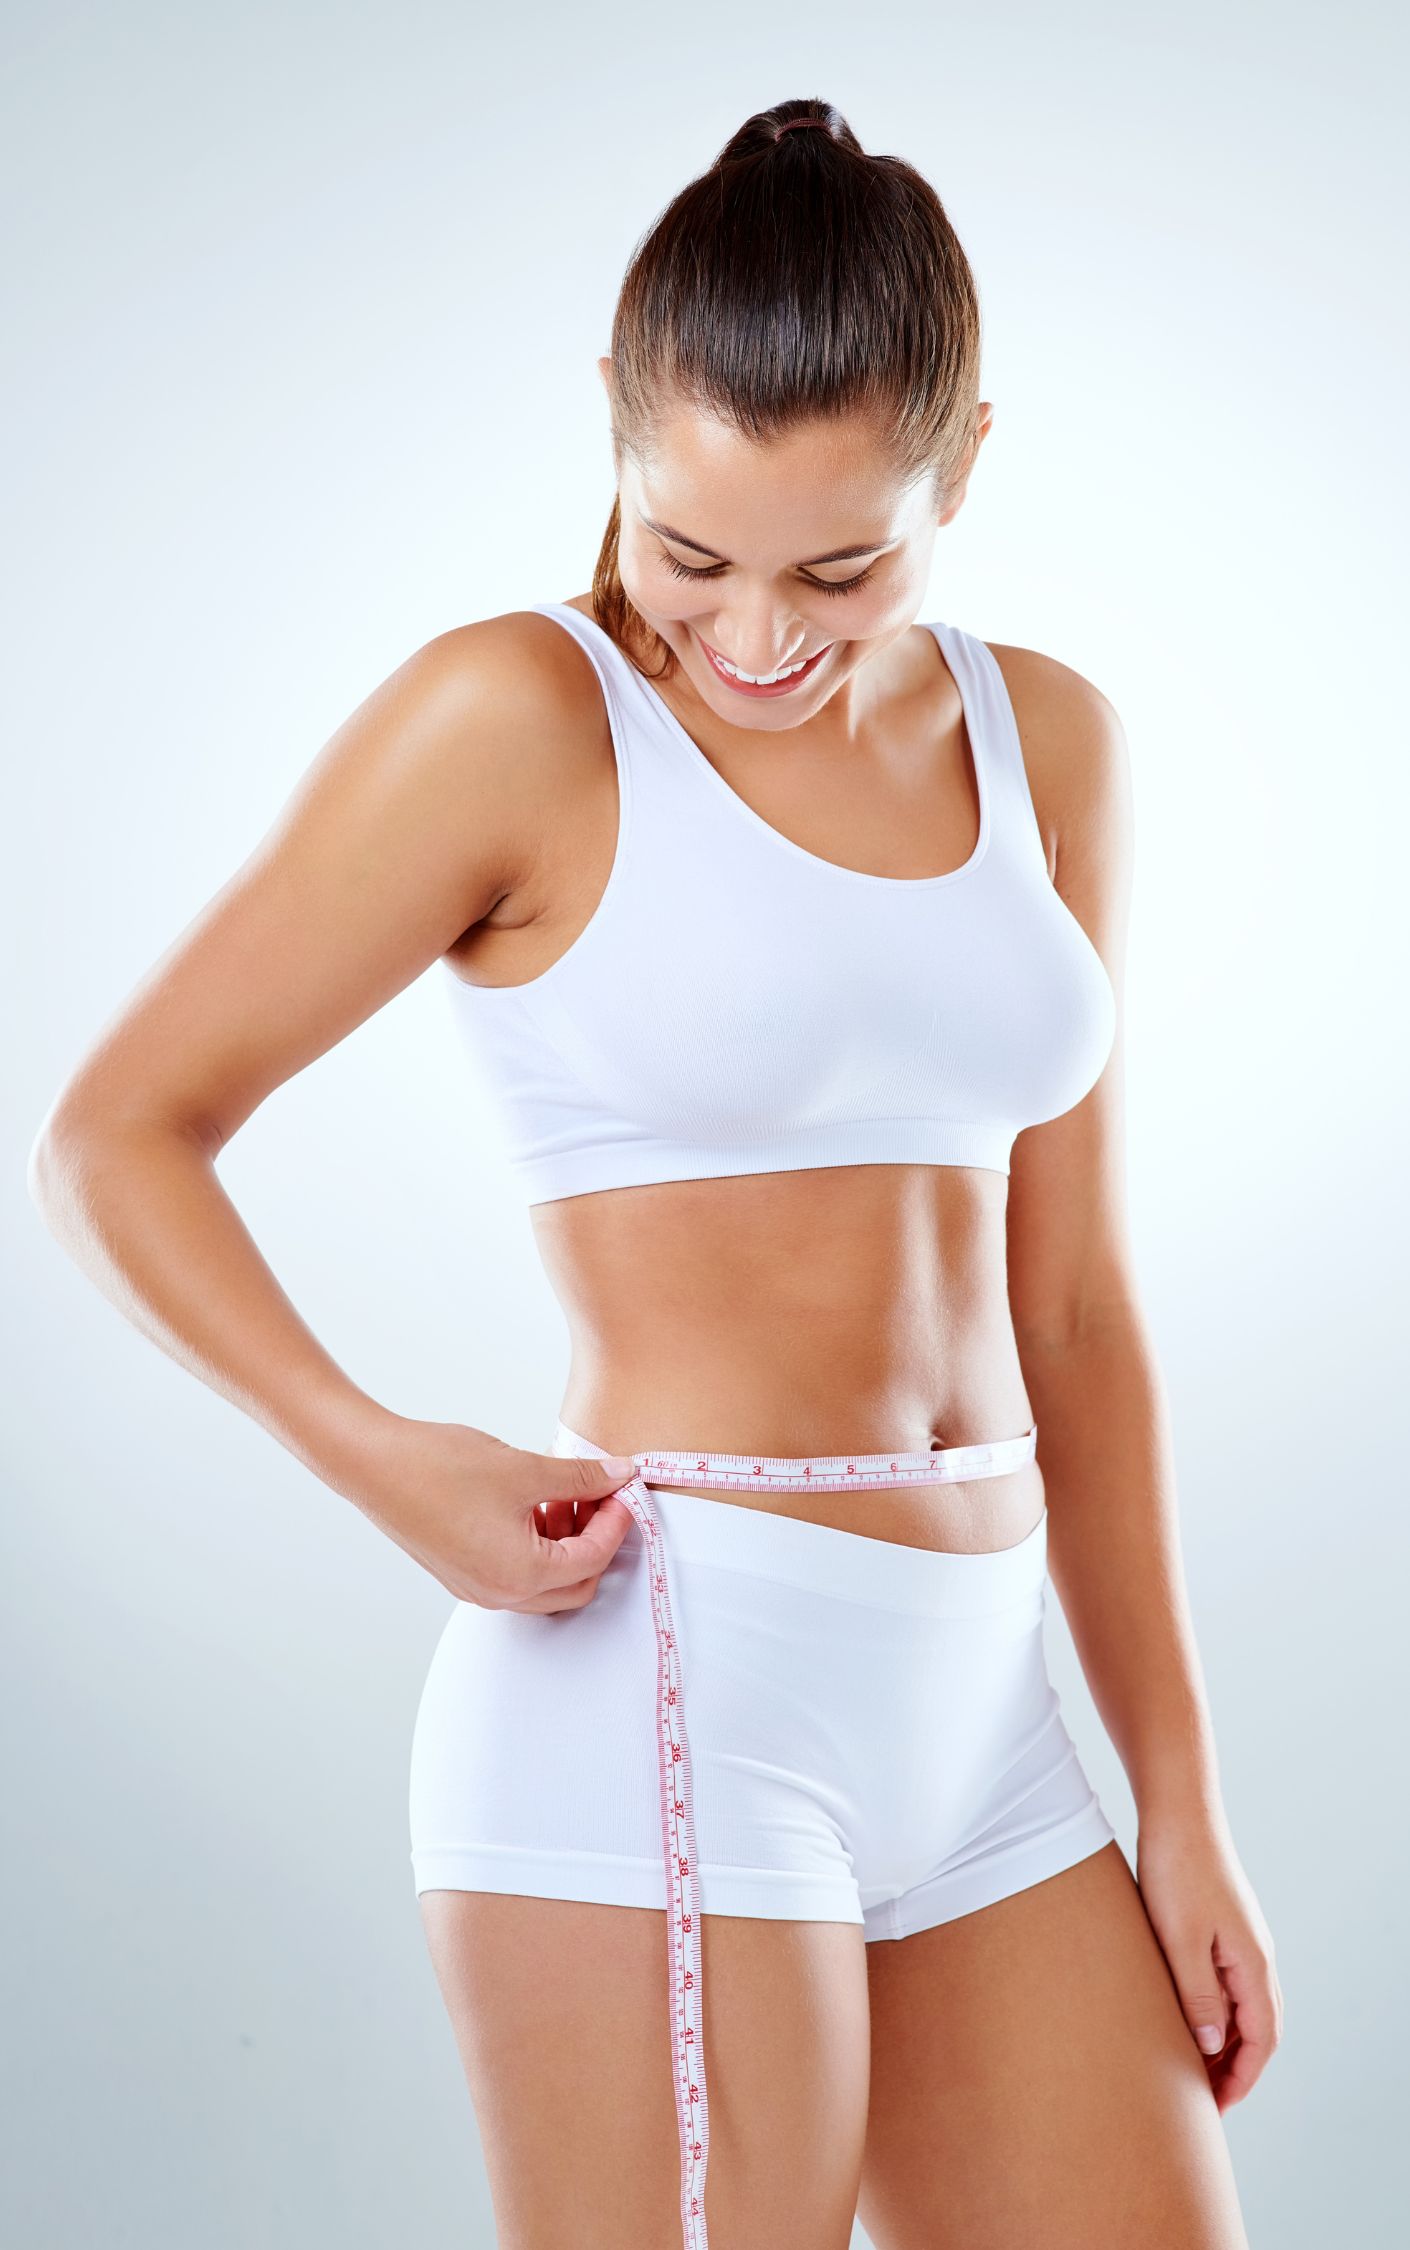 Non-surgical Weight Loss